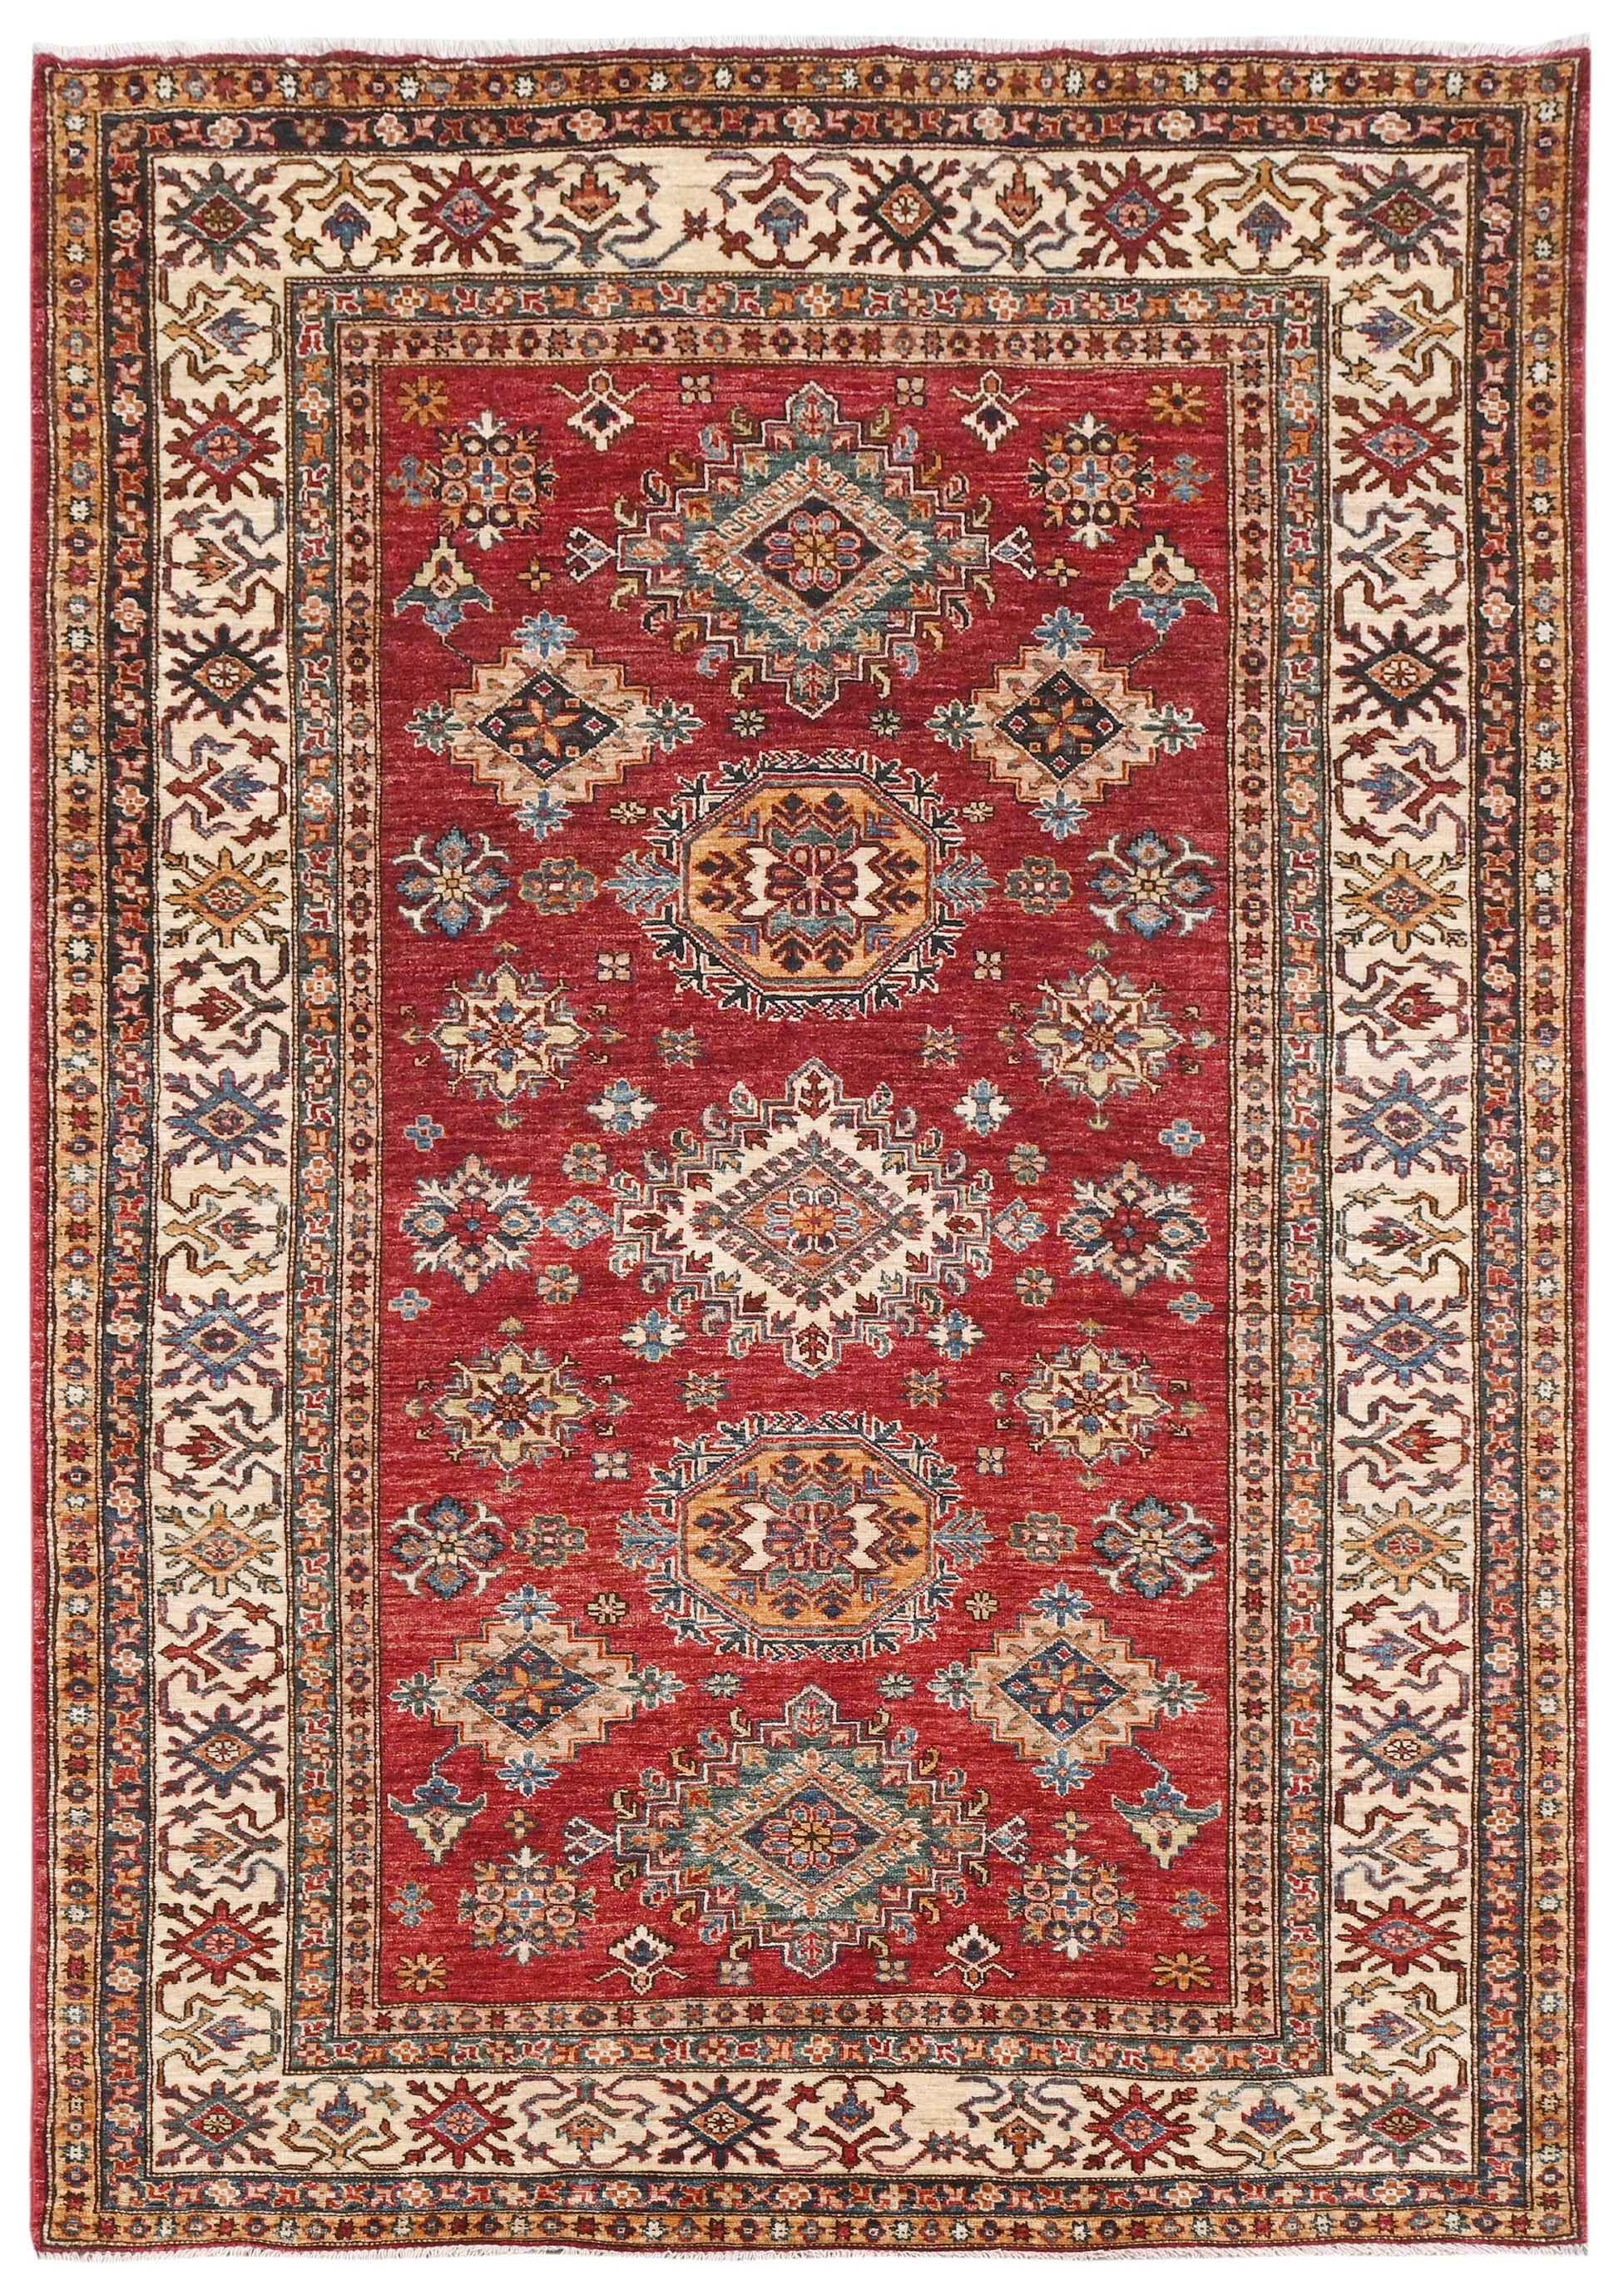 Kazakh Wool Carpet | 8'5" x 5' | Home Decor | Hand-Knotted Rug